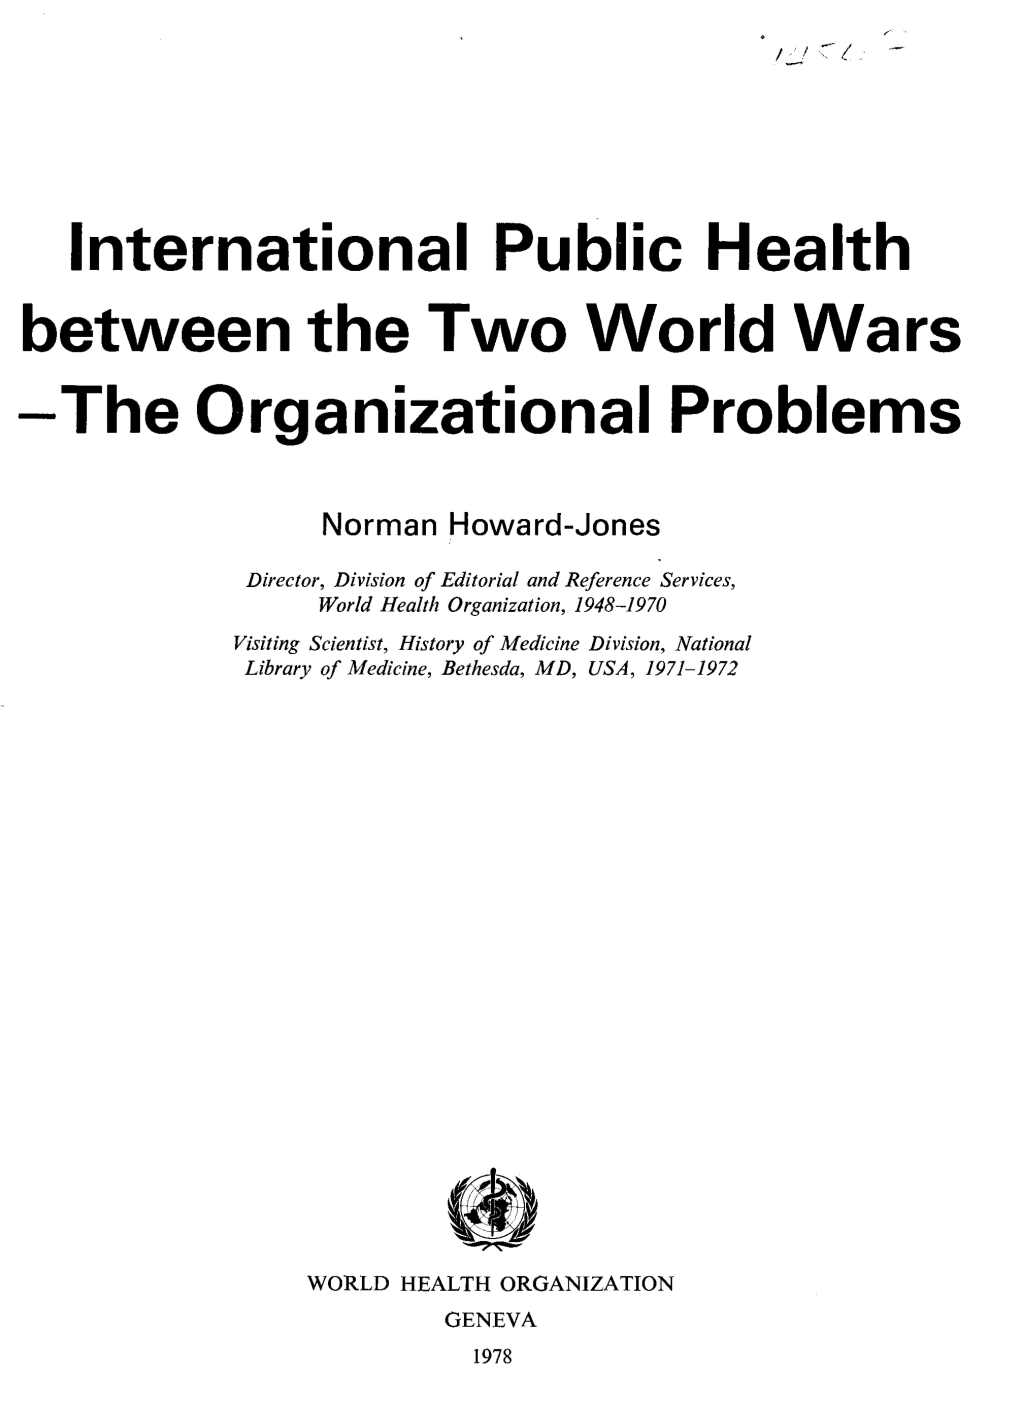 International Public Health Between the Two World Wars -The Organizational Problems